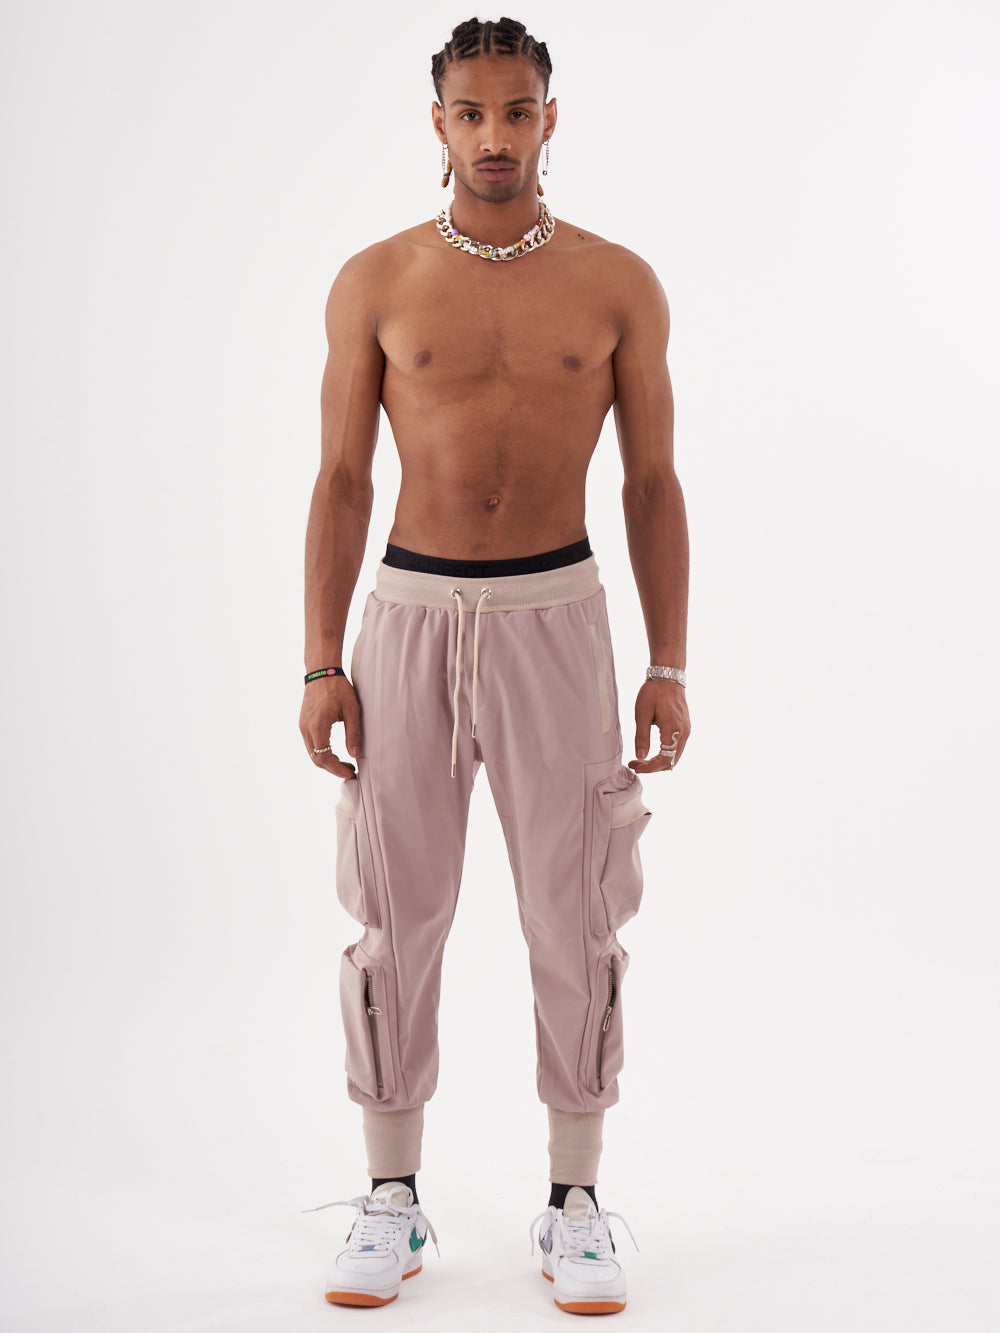 A man in OUTLIER | MAUVE jogging pant is posing for a photo.